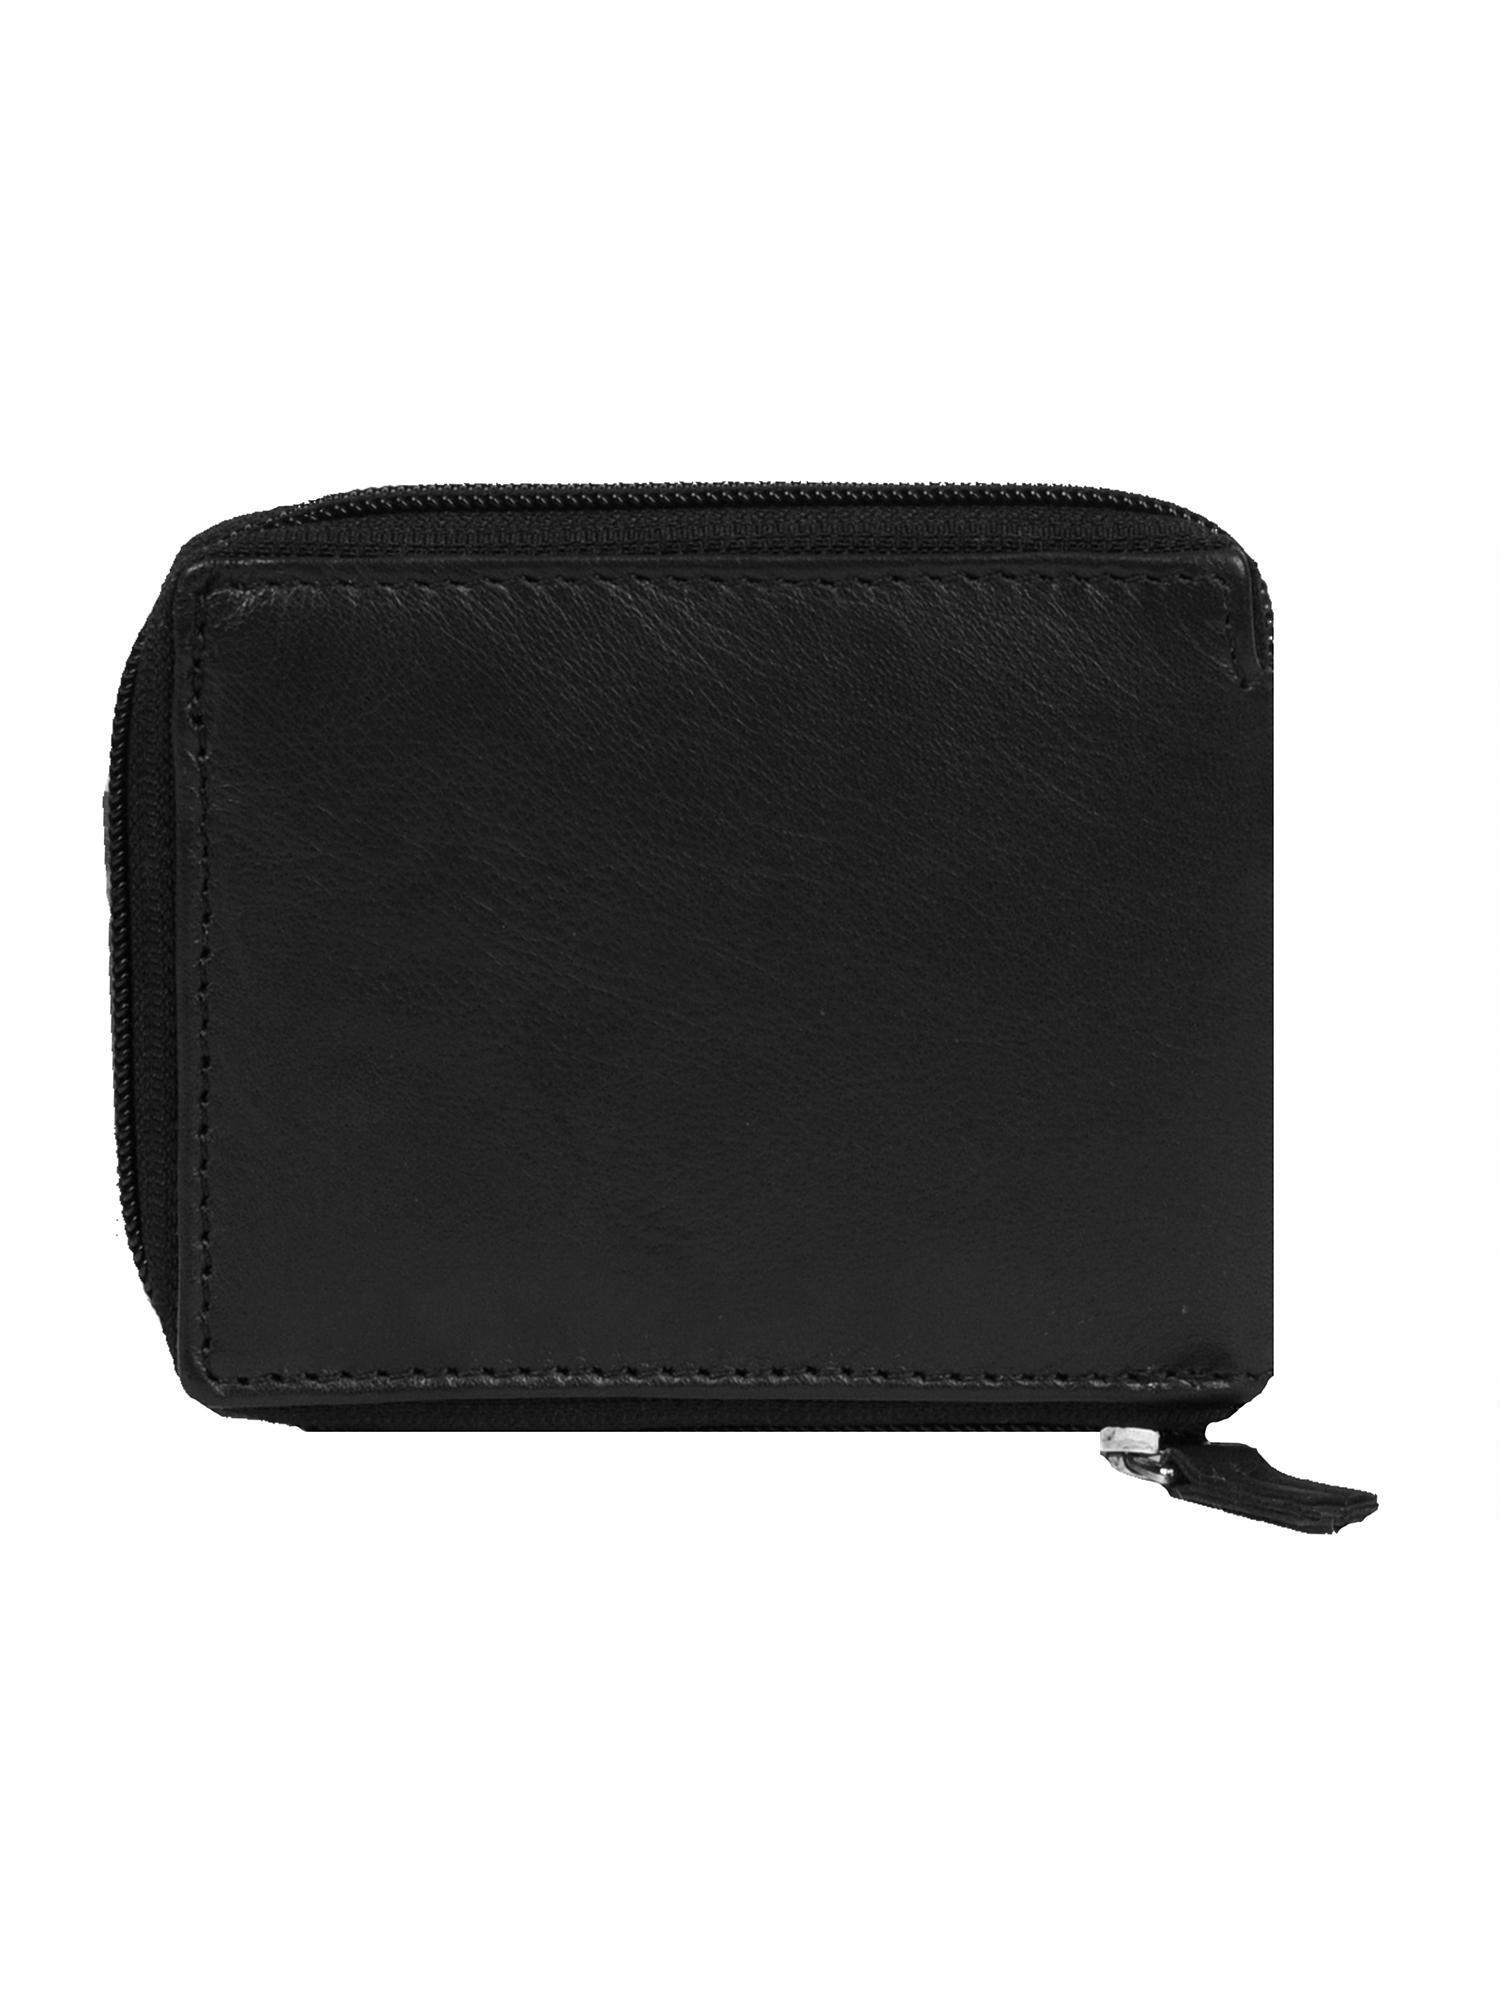 Wilsons Leather Leather Zip Around Wallet in Black for Men - Lyst